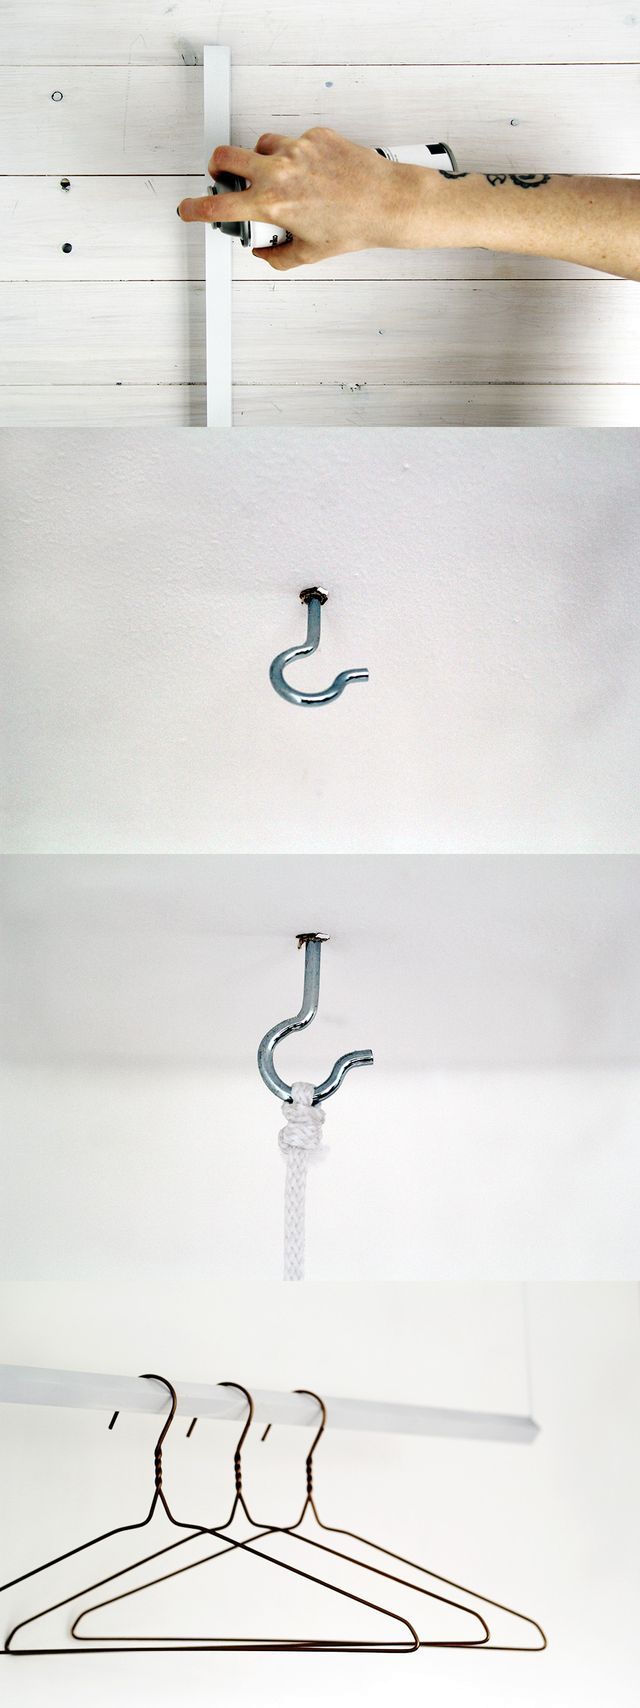 the process of creating a hanger rails with your own hands